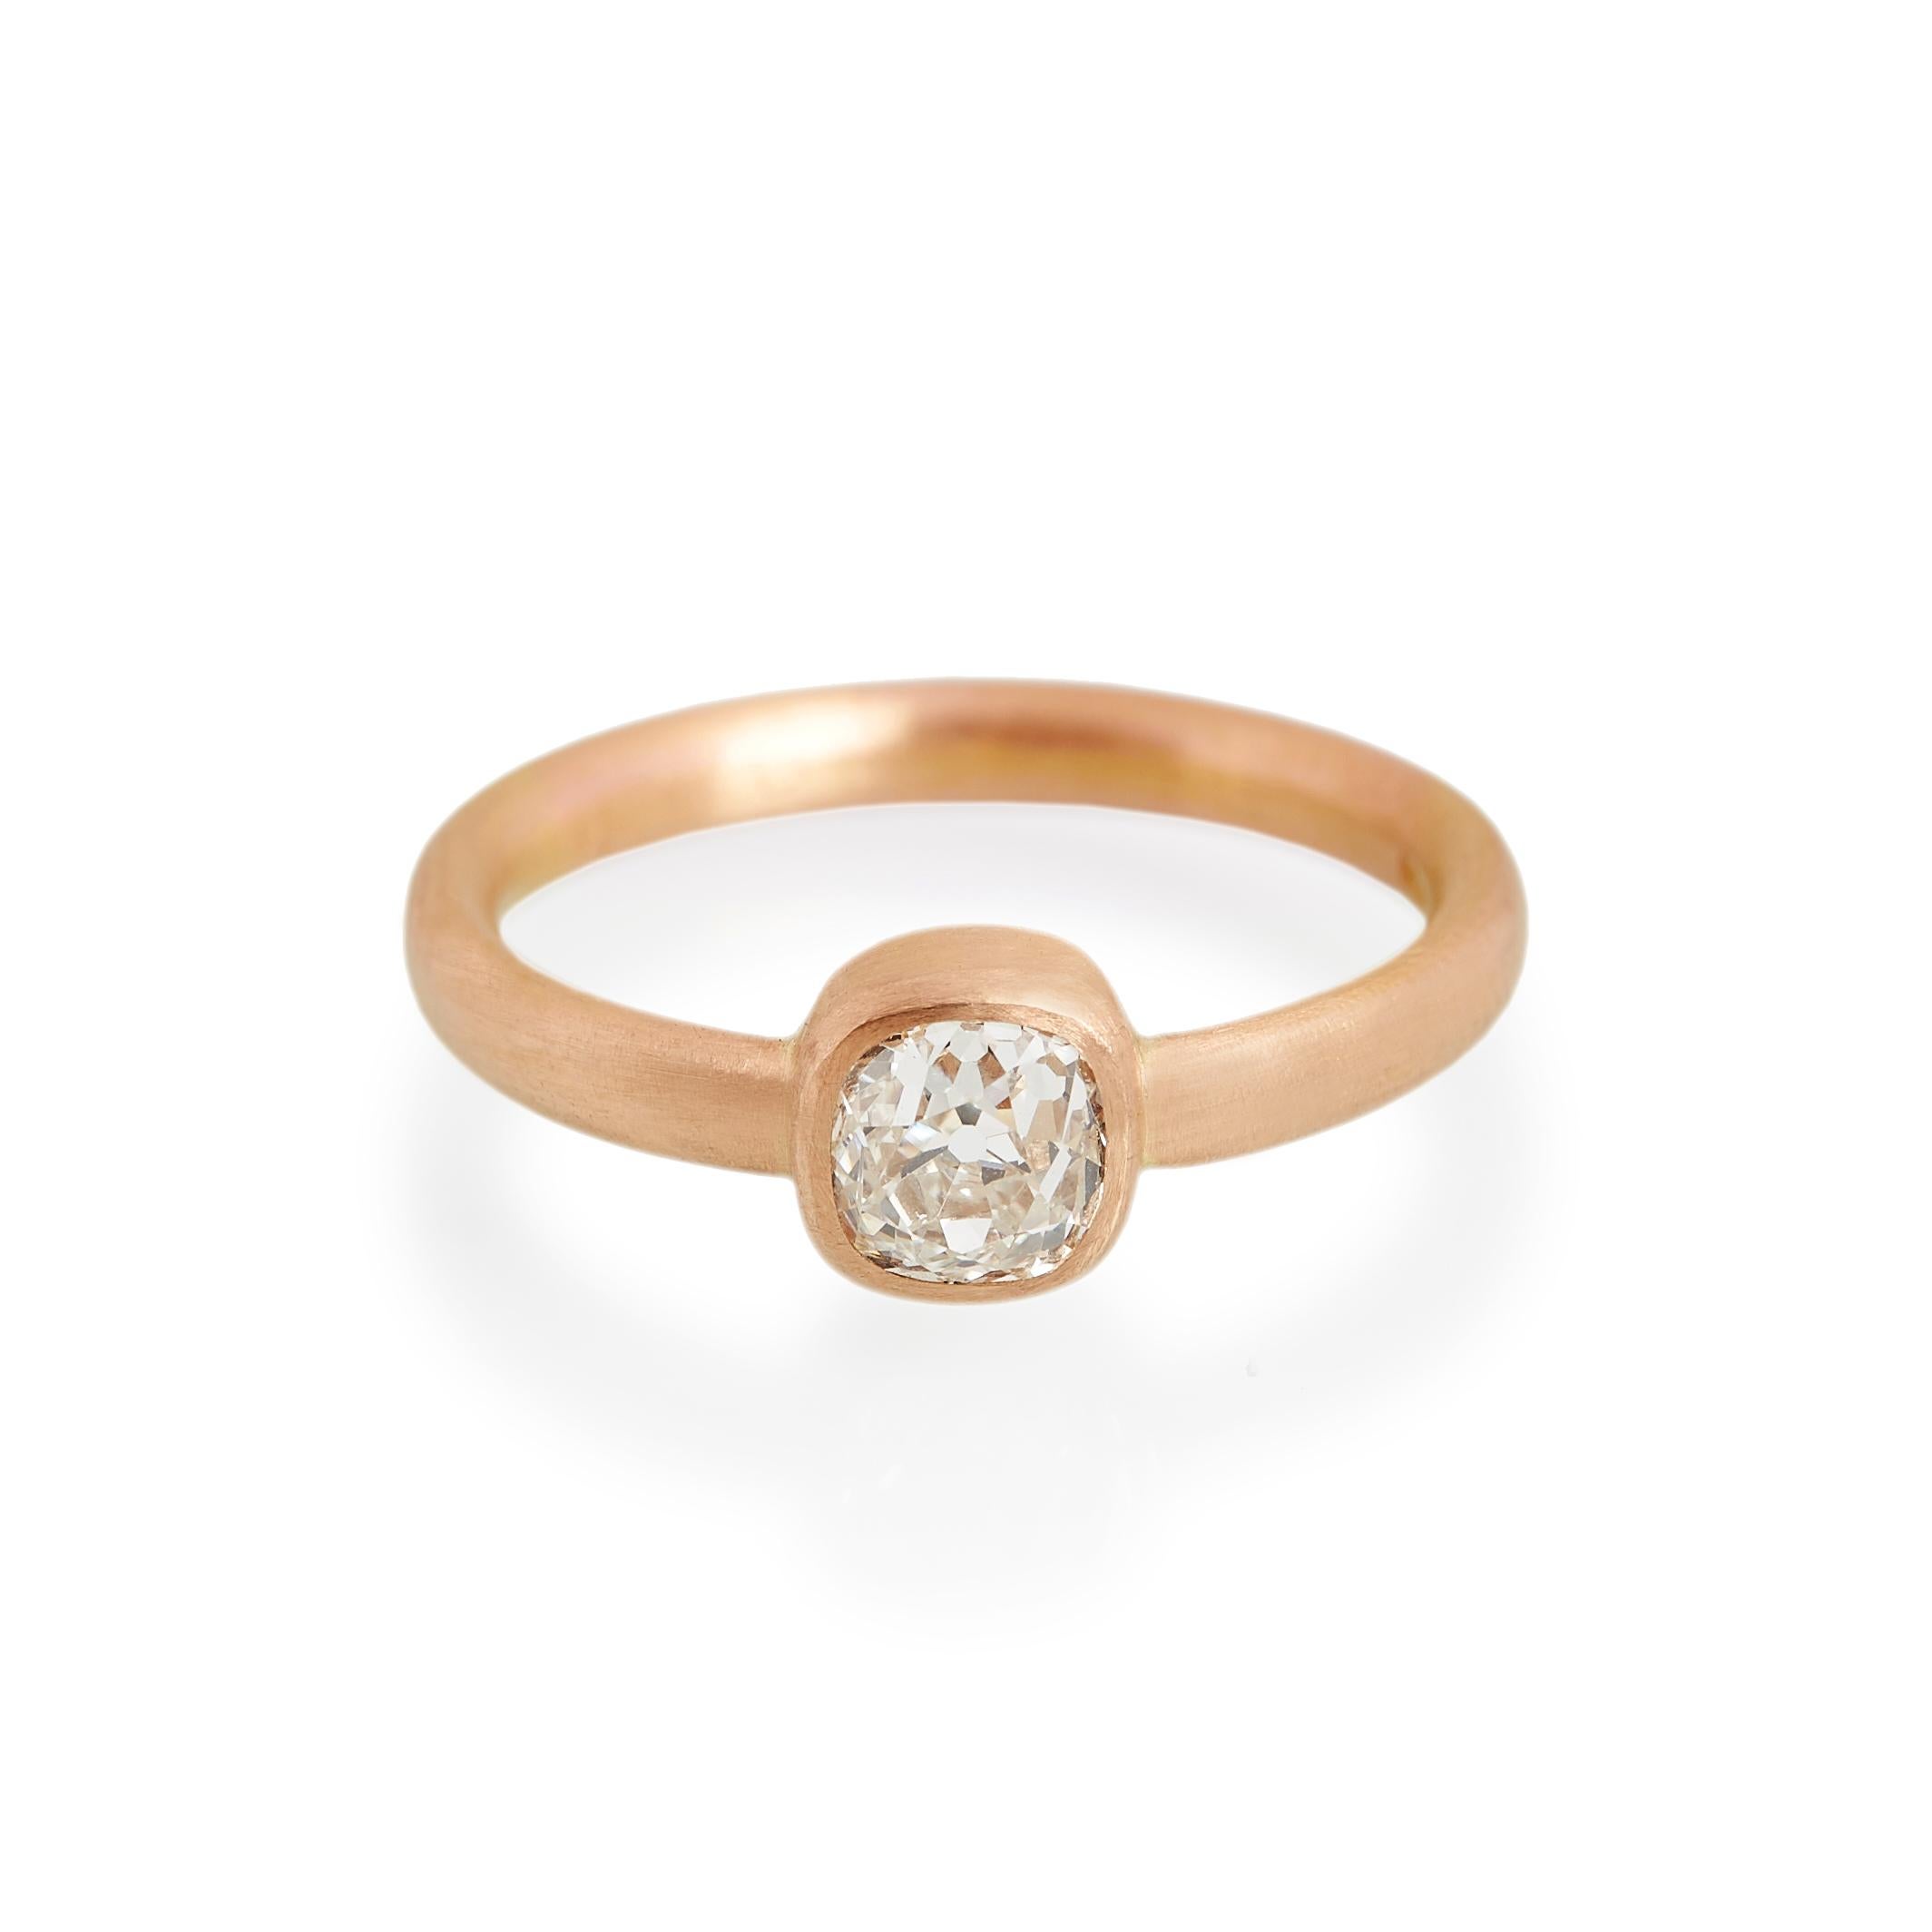 Antique cushion cut diamond ring.
Ref: R19001

0.76cts antique cushion cut diamond  Clarity VS2  Colour H
18ct rose gold

Cadby & Co are a family business that specialise in reusing & up cycling old cut diamonds and fine gem stones. Deborah Cadby’s